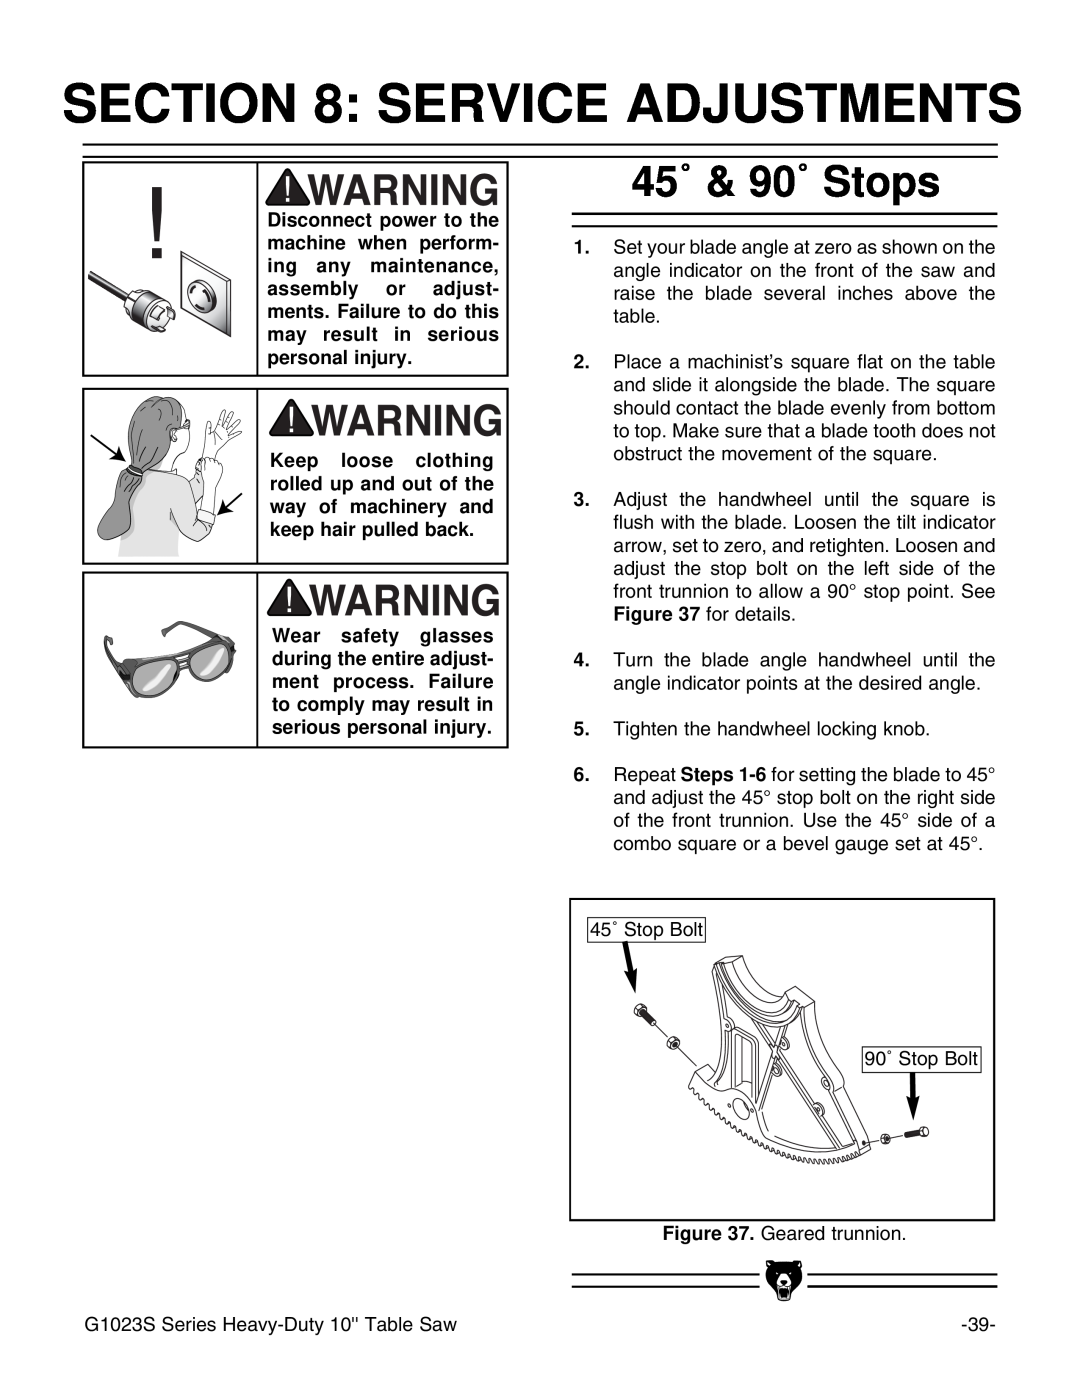 Grizzly MODEL instruction manual Service Adjustments, 45˚ & 90˚ Stops 